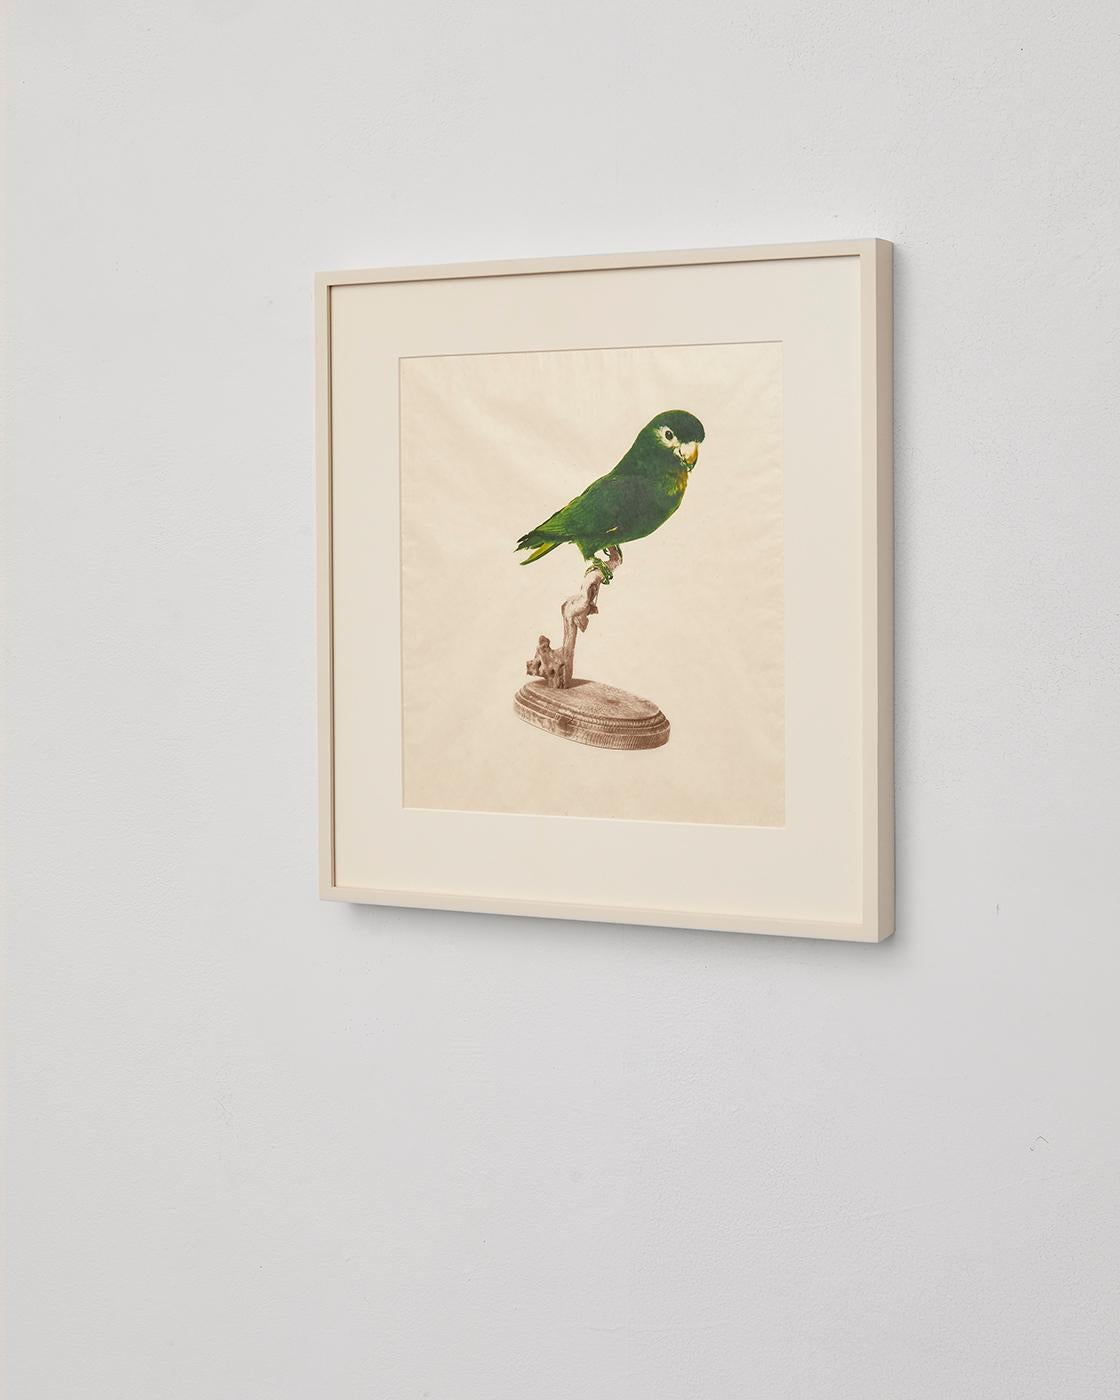 Louis, Still, heirloom series, handprinted colour lithograph, japanese paper - Print by Jenn law